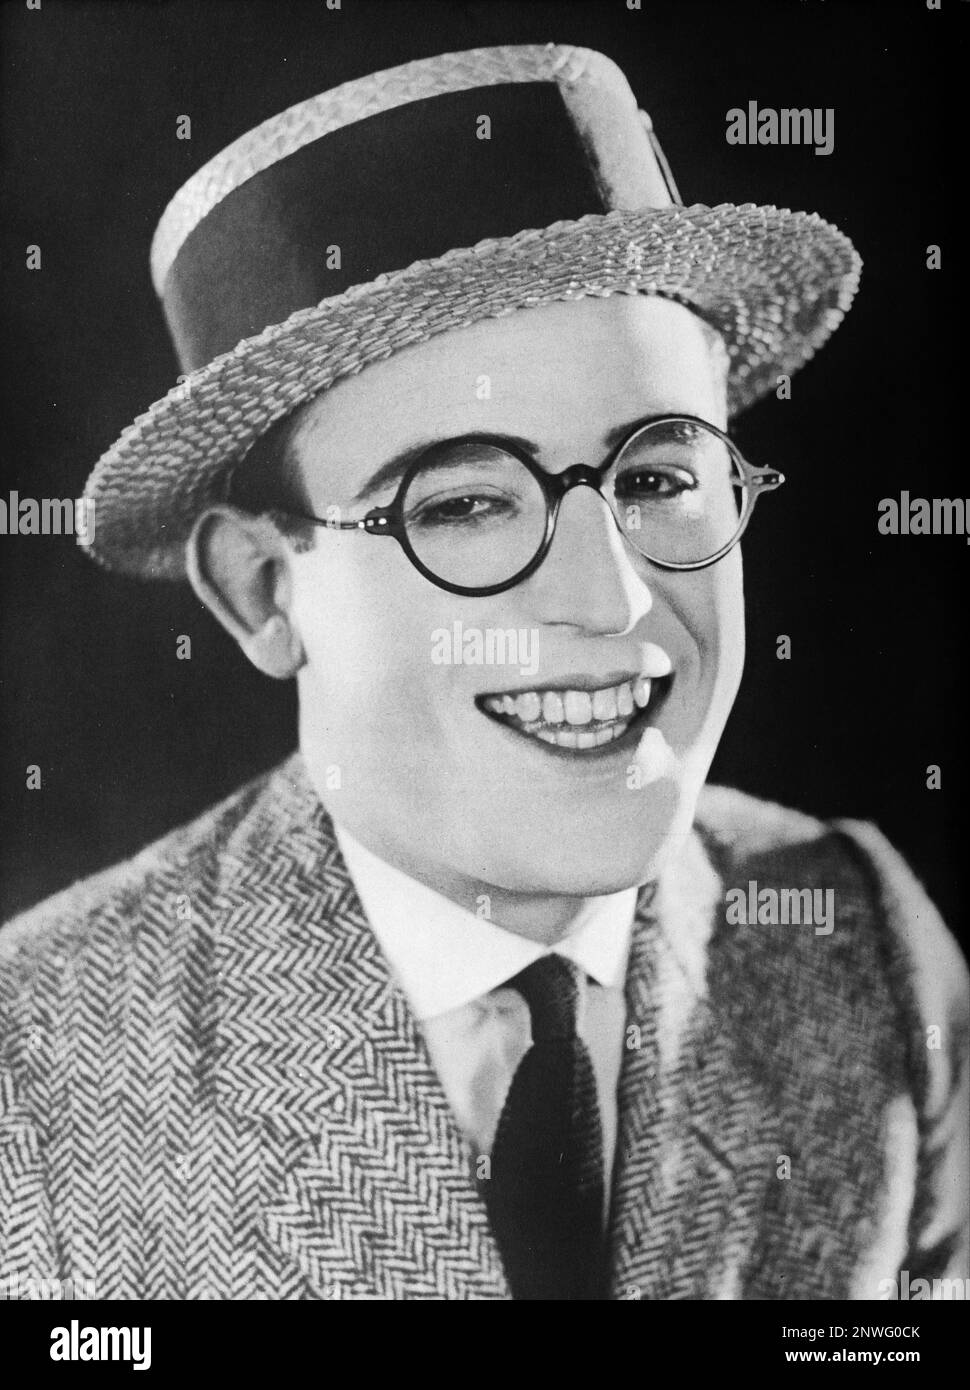 Harold Lloyd, Harold Clayton Lloyd, Sr. (1893 – 1971) American actor, comedian who appeared in many silent comedy films. Stock Photo